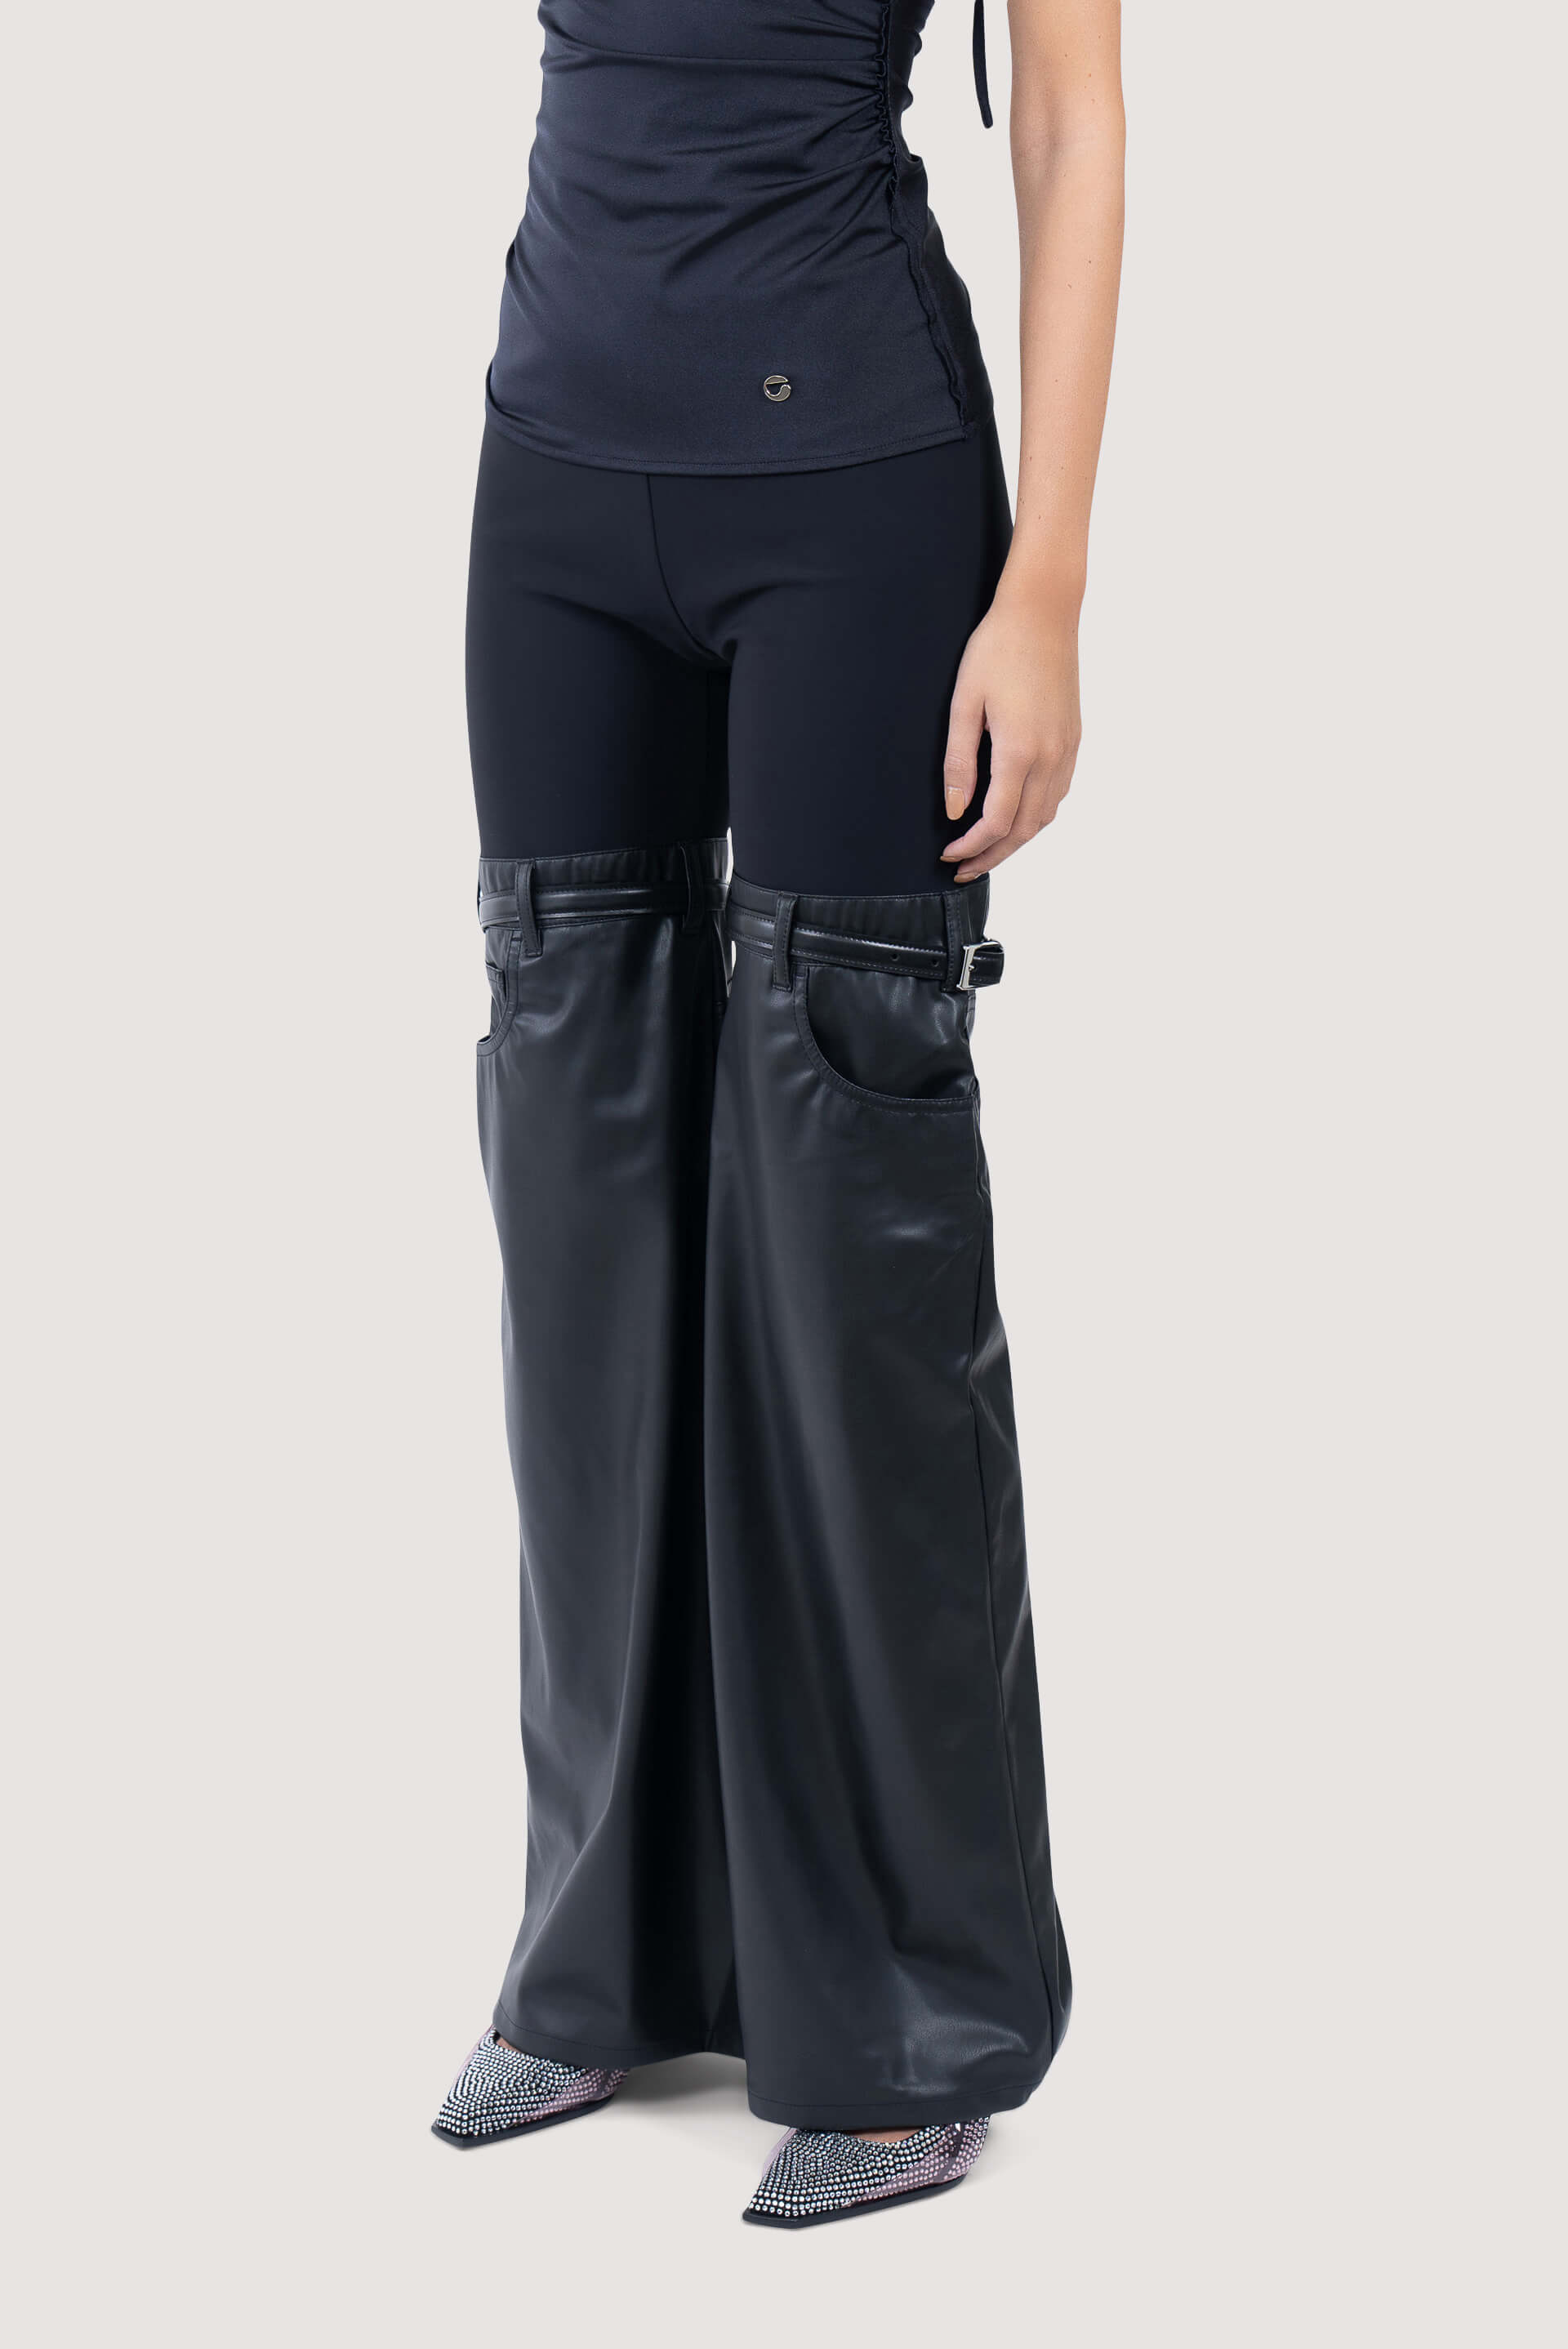 Coperni Hybrid Flare Faux Leather Trousers - Fabric of Society